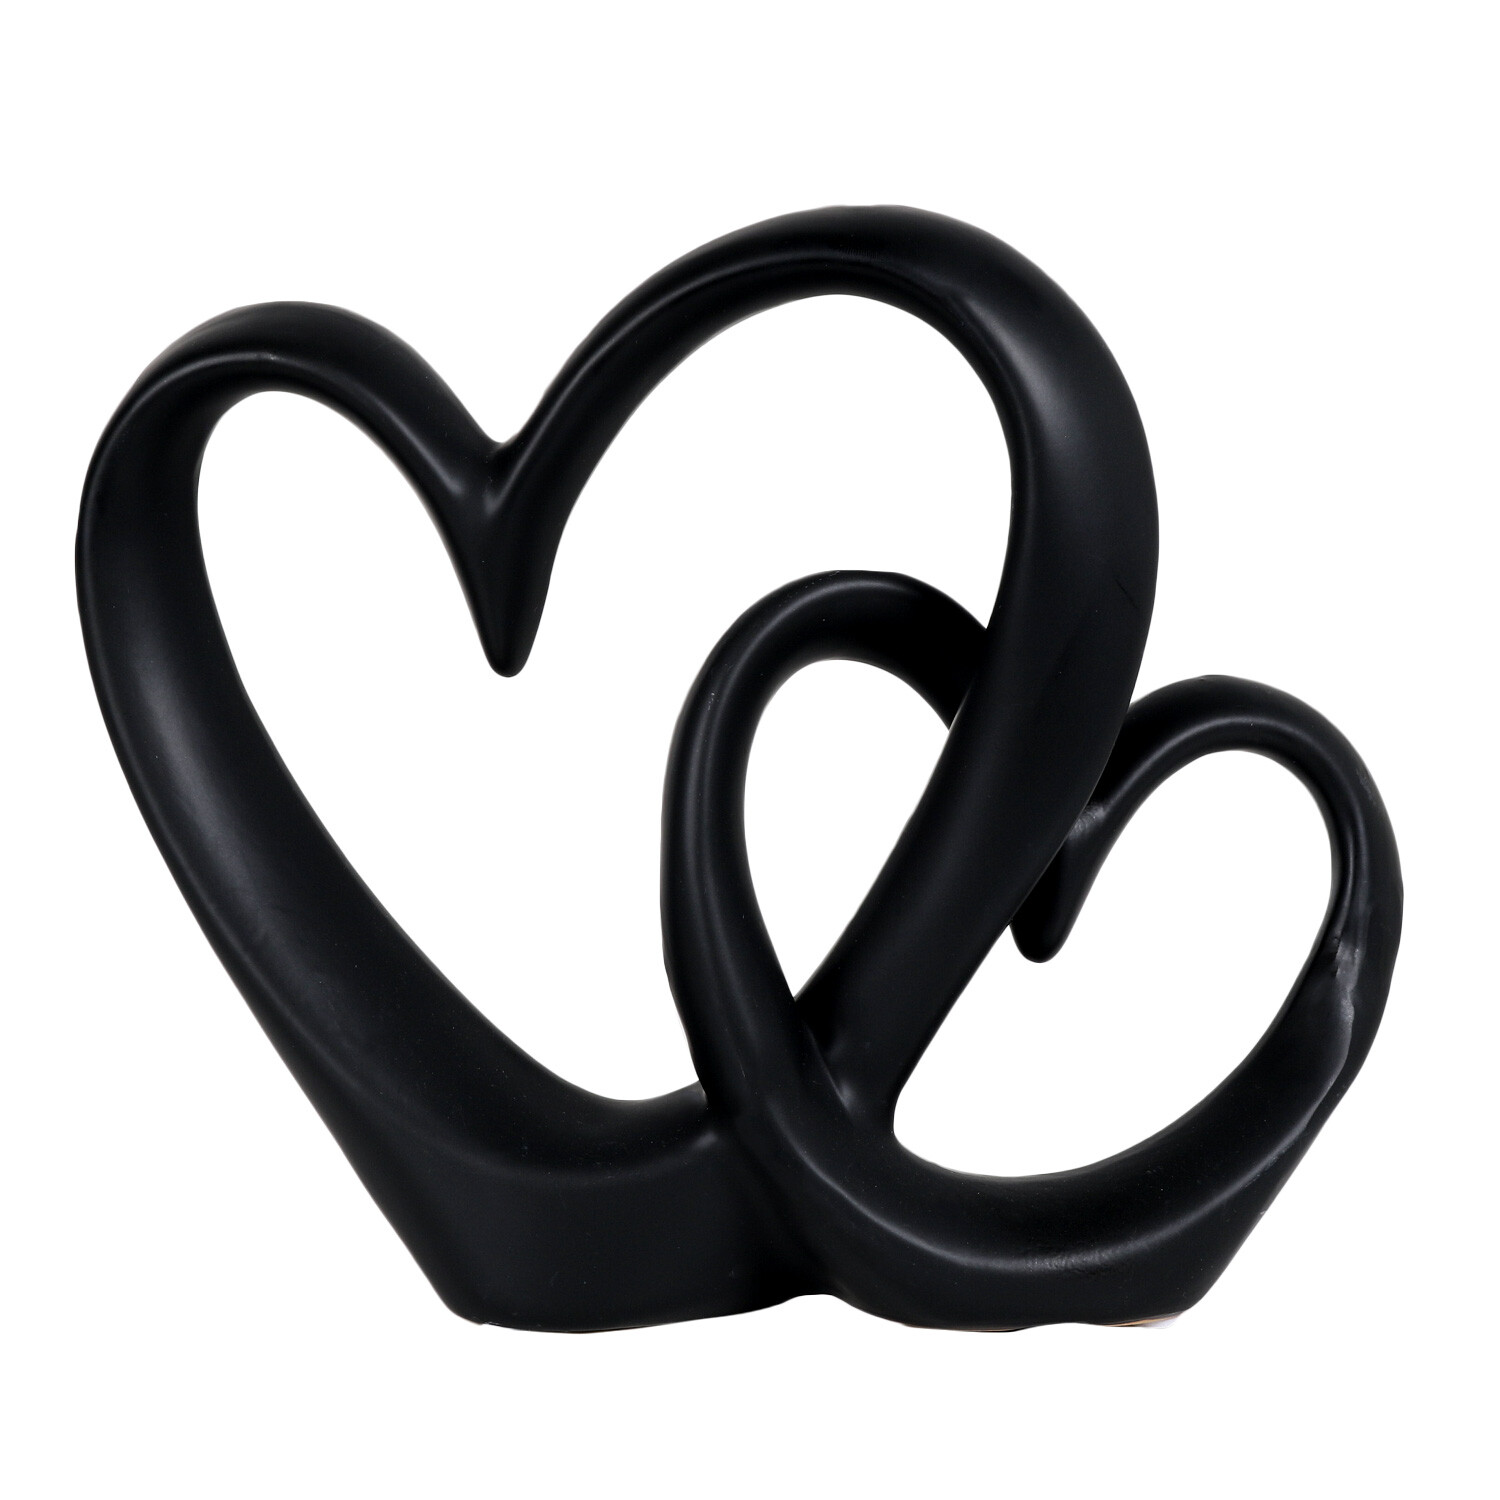 Single Black or White Double Heart Ornament in Assorted styles Image 1